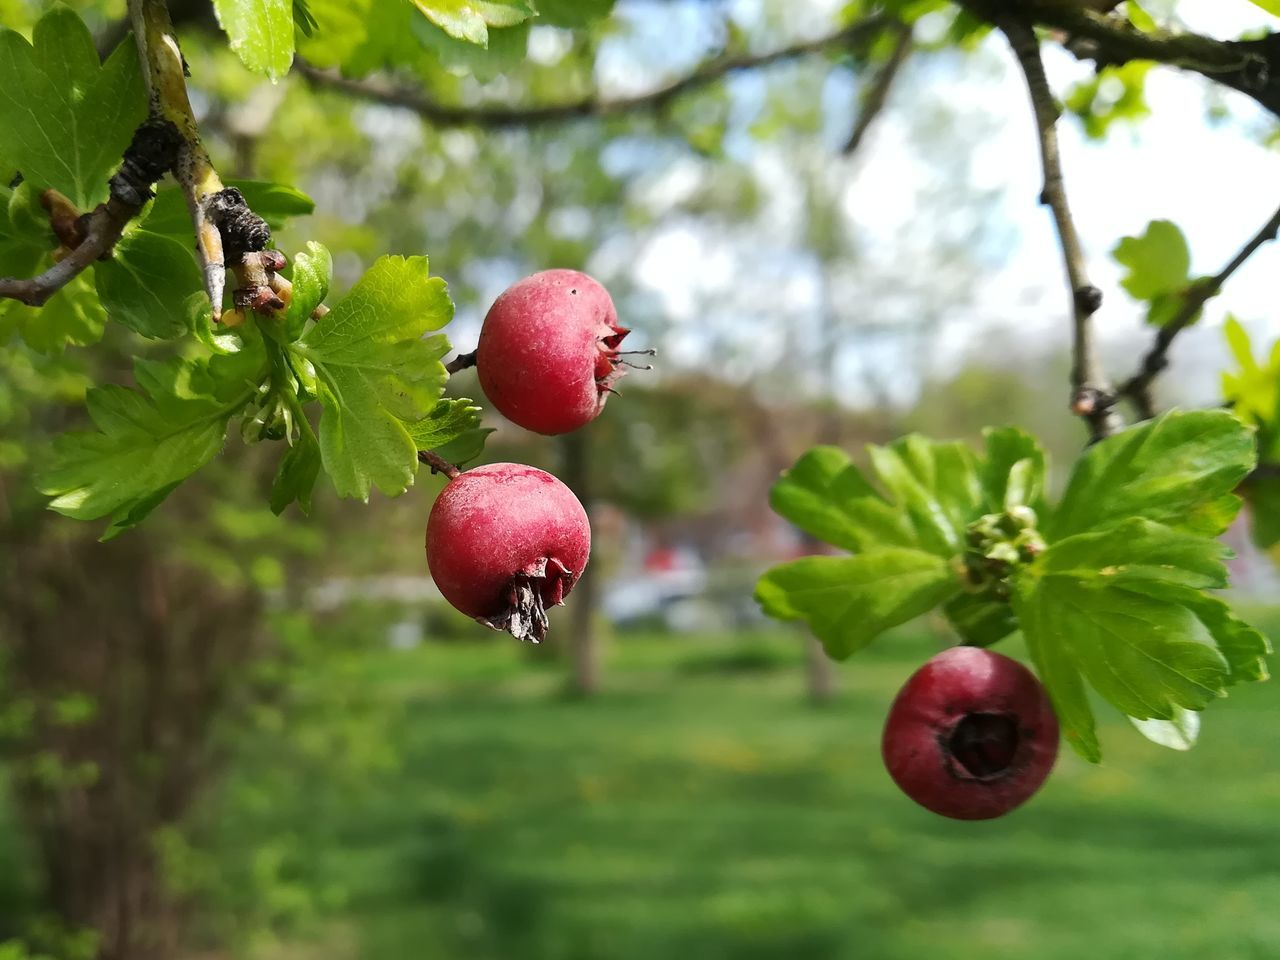 fruit, healthy eating, food, food and drink, plant, growth, freshness, tree, leaf, plant part, focus on foreground, wellbeing, green color, day, nature, red, close-up, branch, beauty in nature, no people, outdoors, ripe